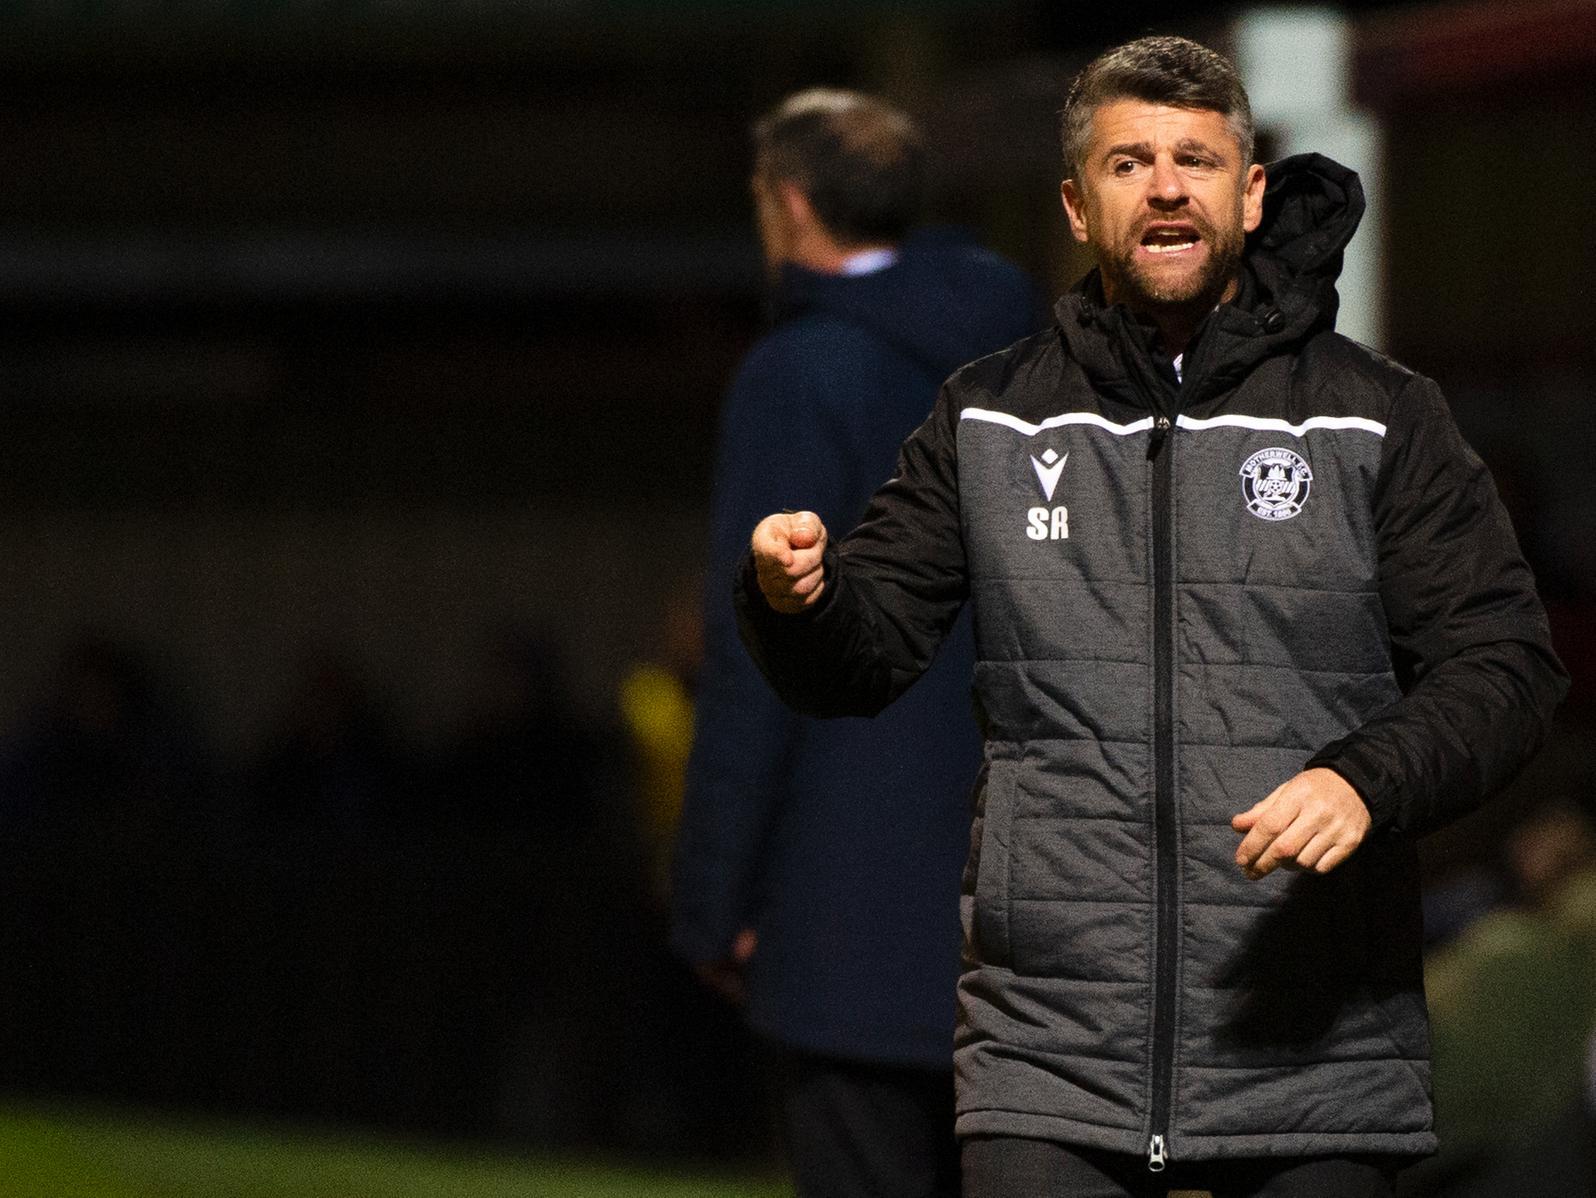 The Motherwell manager has successfully kept his club away from the relegation battle during his time in charge and have reached two major finals. They're currently third in the Ladbrokes Premiership.